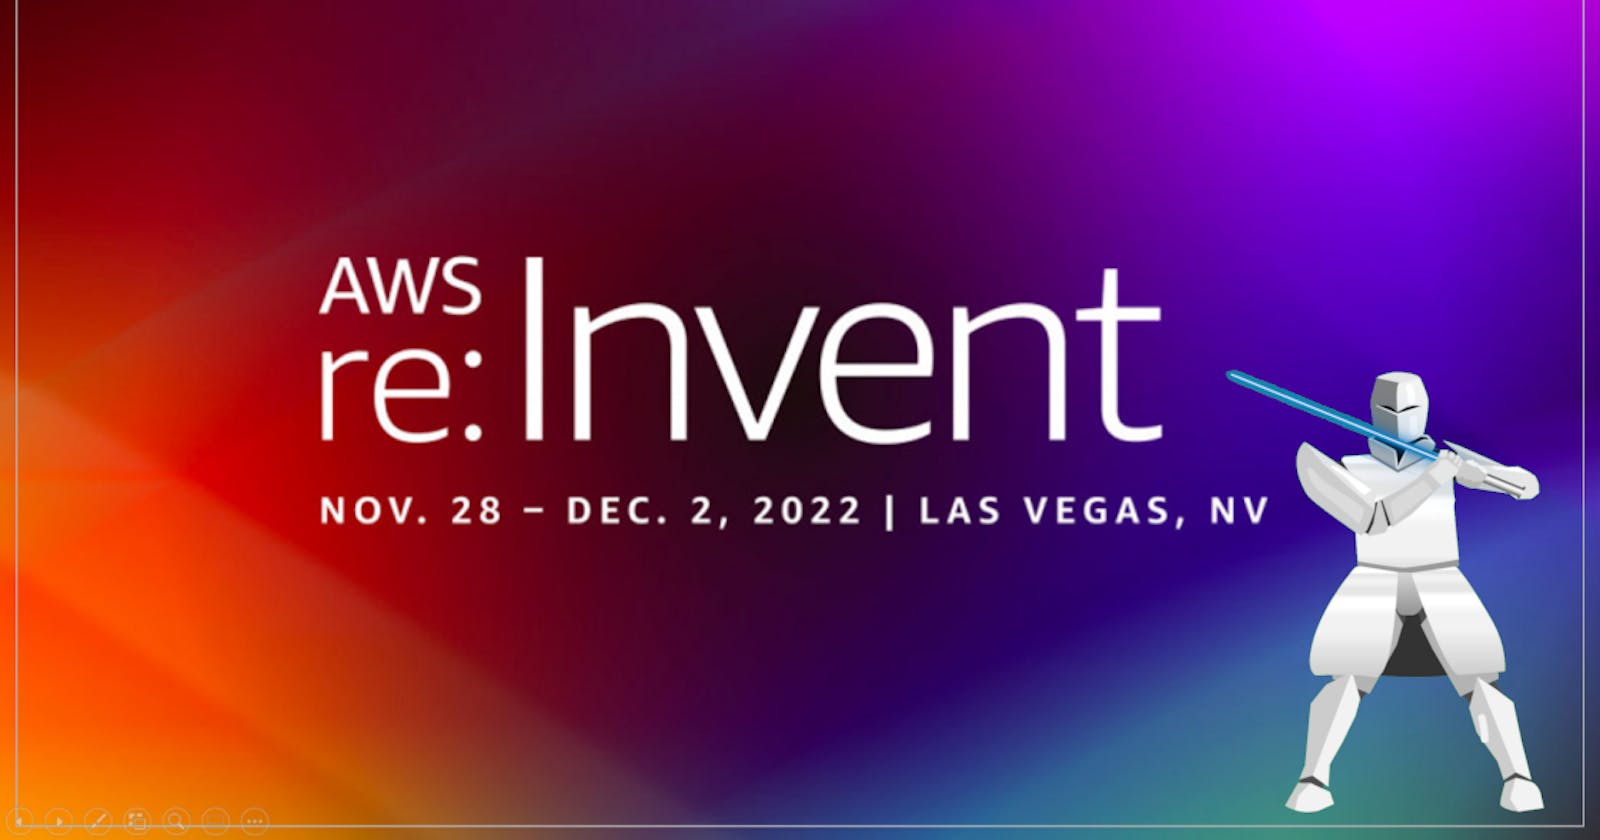 See you at AWS re:Invent 2022!